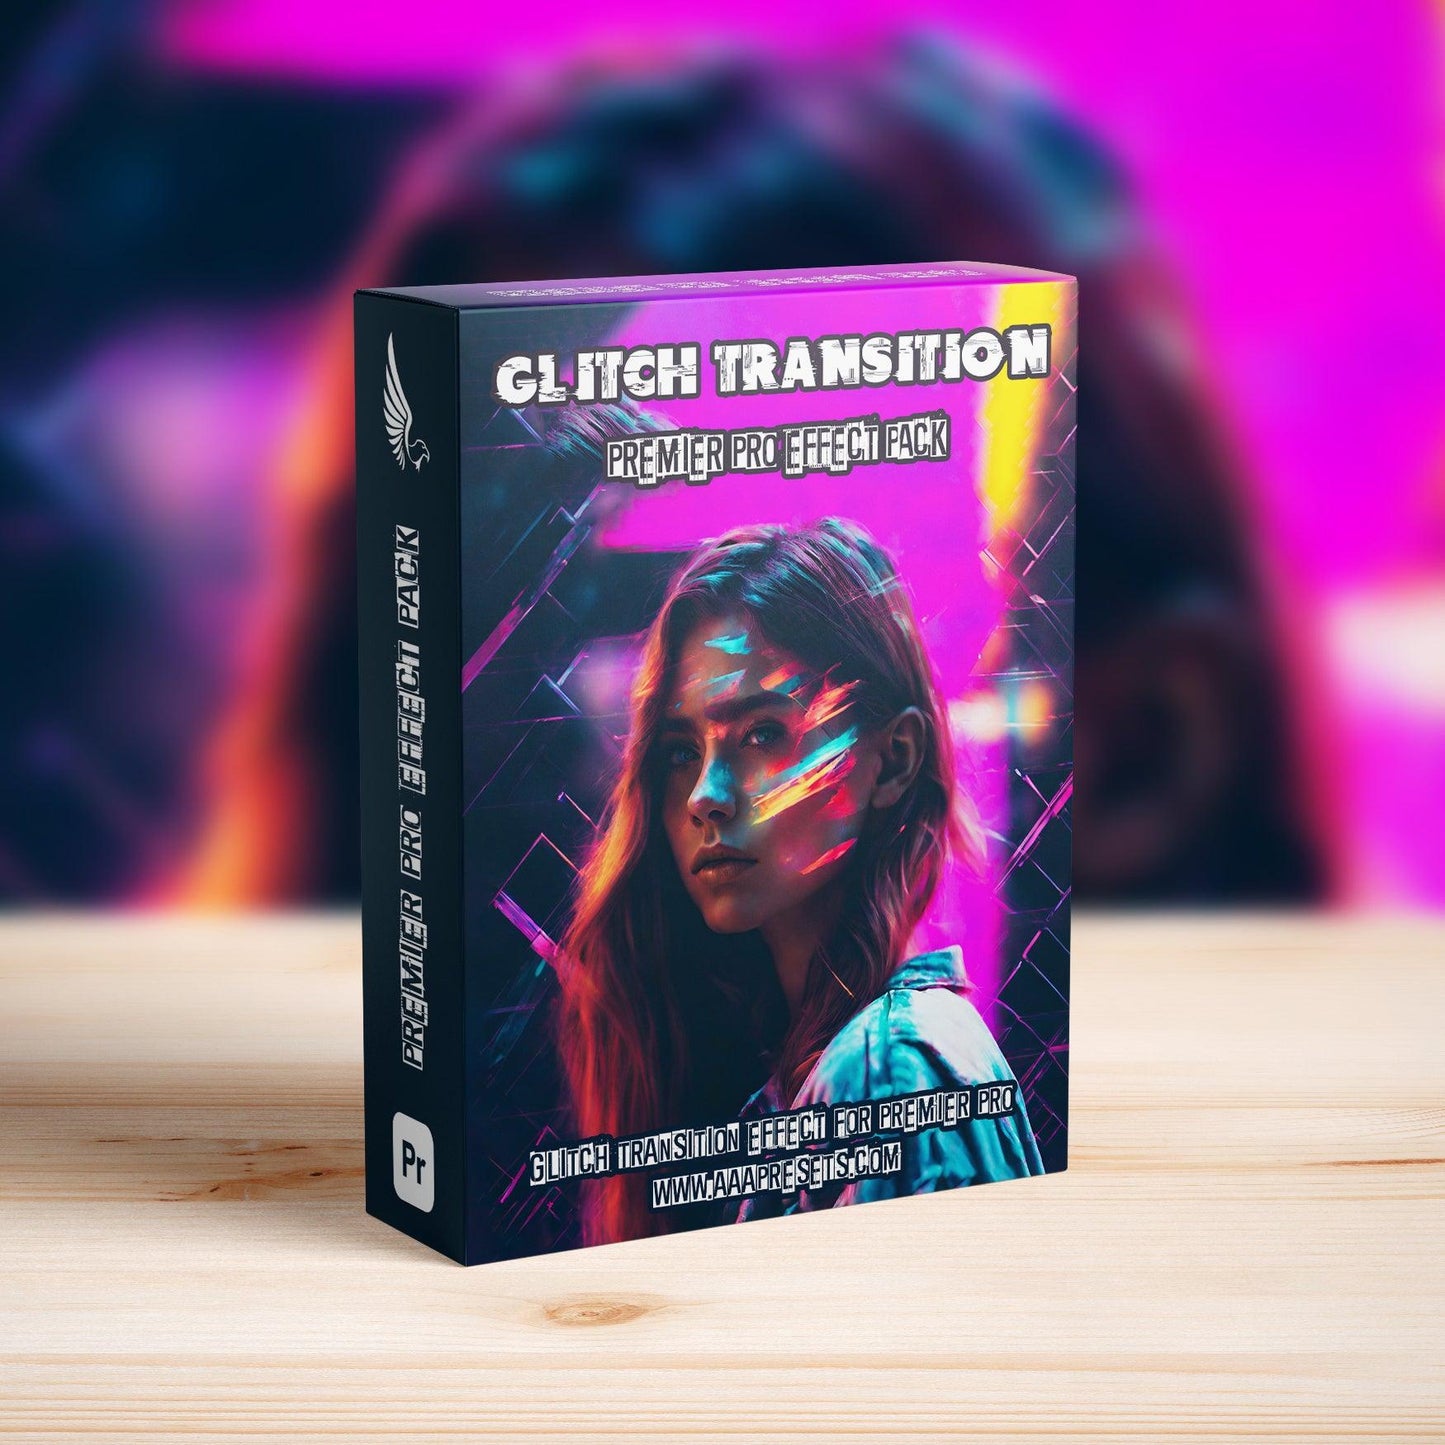 Glitch Transitions for Adobe Premiere Pro - effects for adobe premiere pro, Glitch Transitions, premiere pro transitions pack, video transitions pack - aaapresets.com